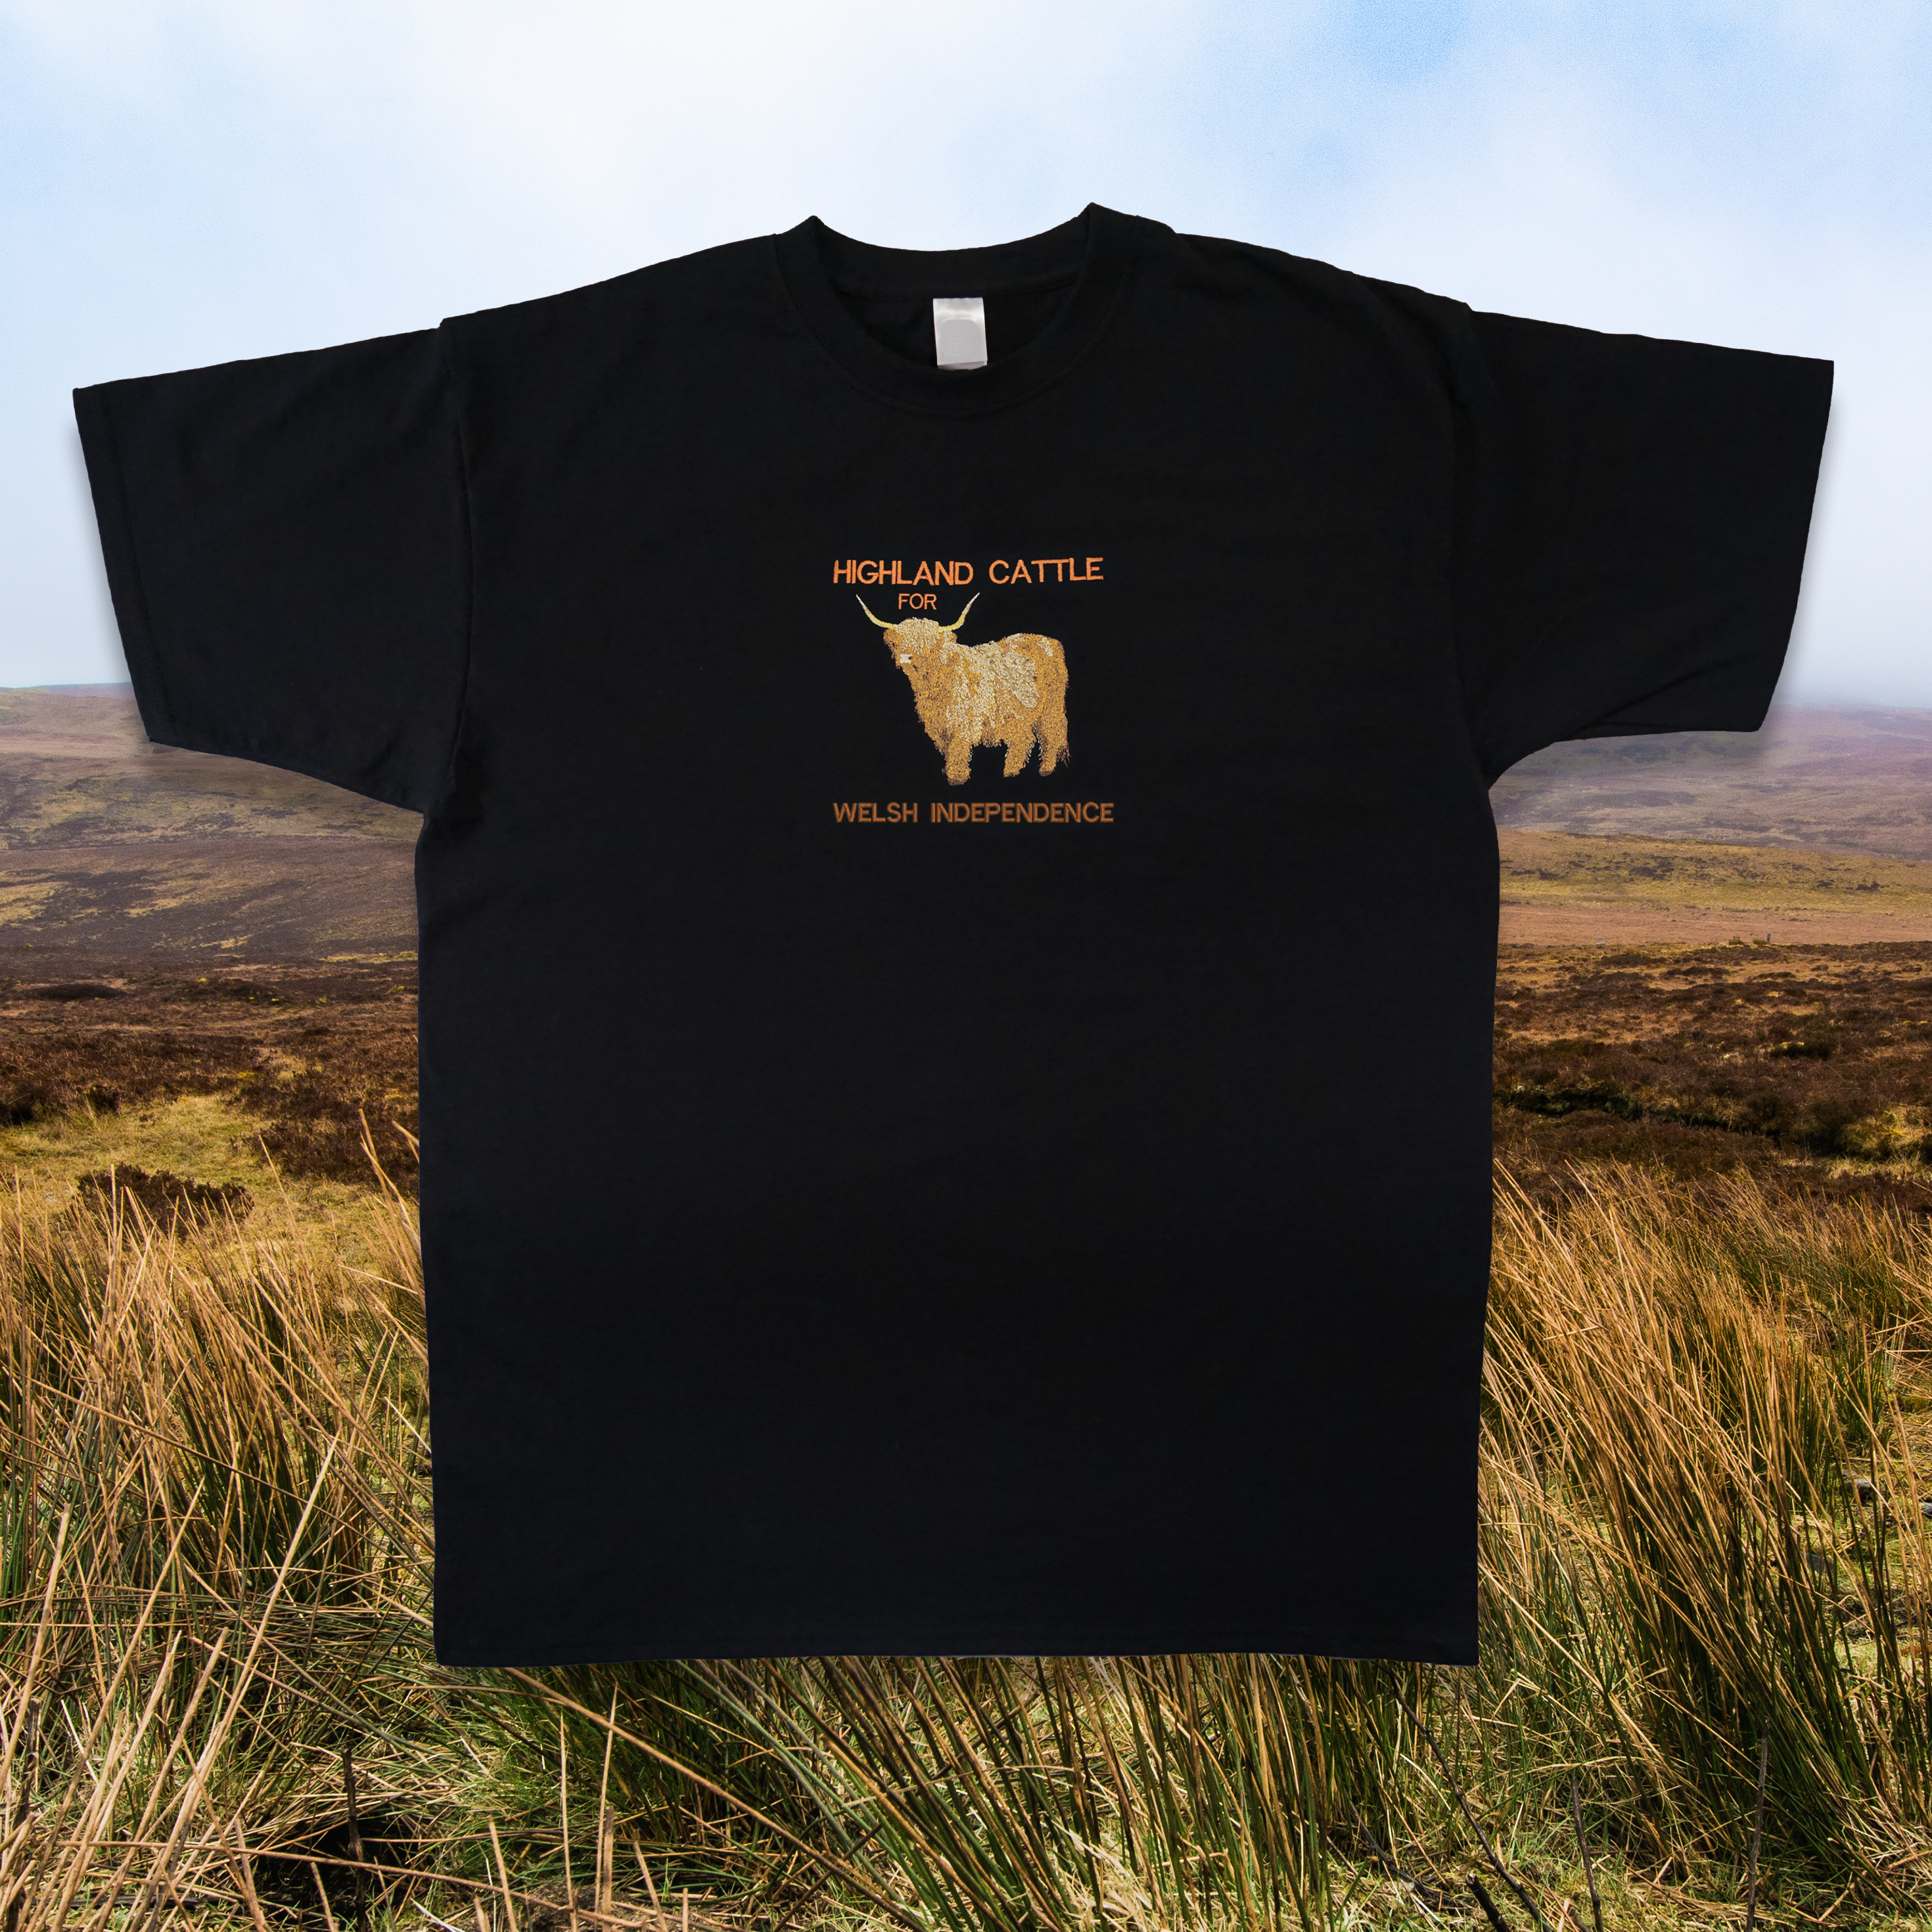 HIGHLAND CATTLE FOR WELSH INDEPENDENCE T-SHIRT